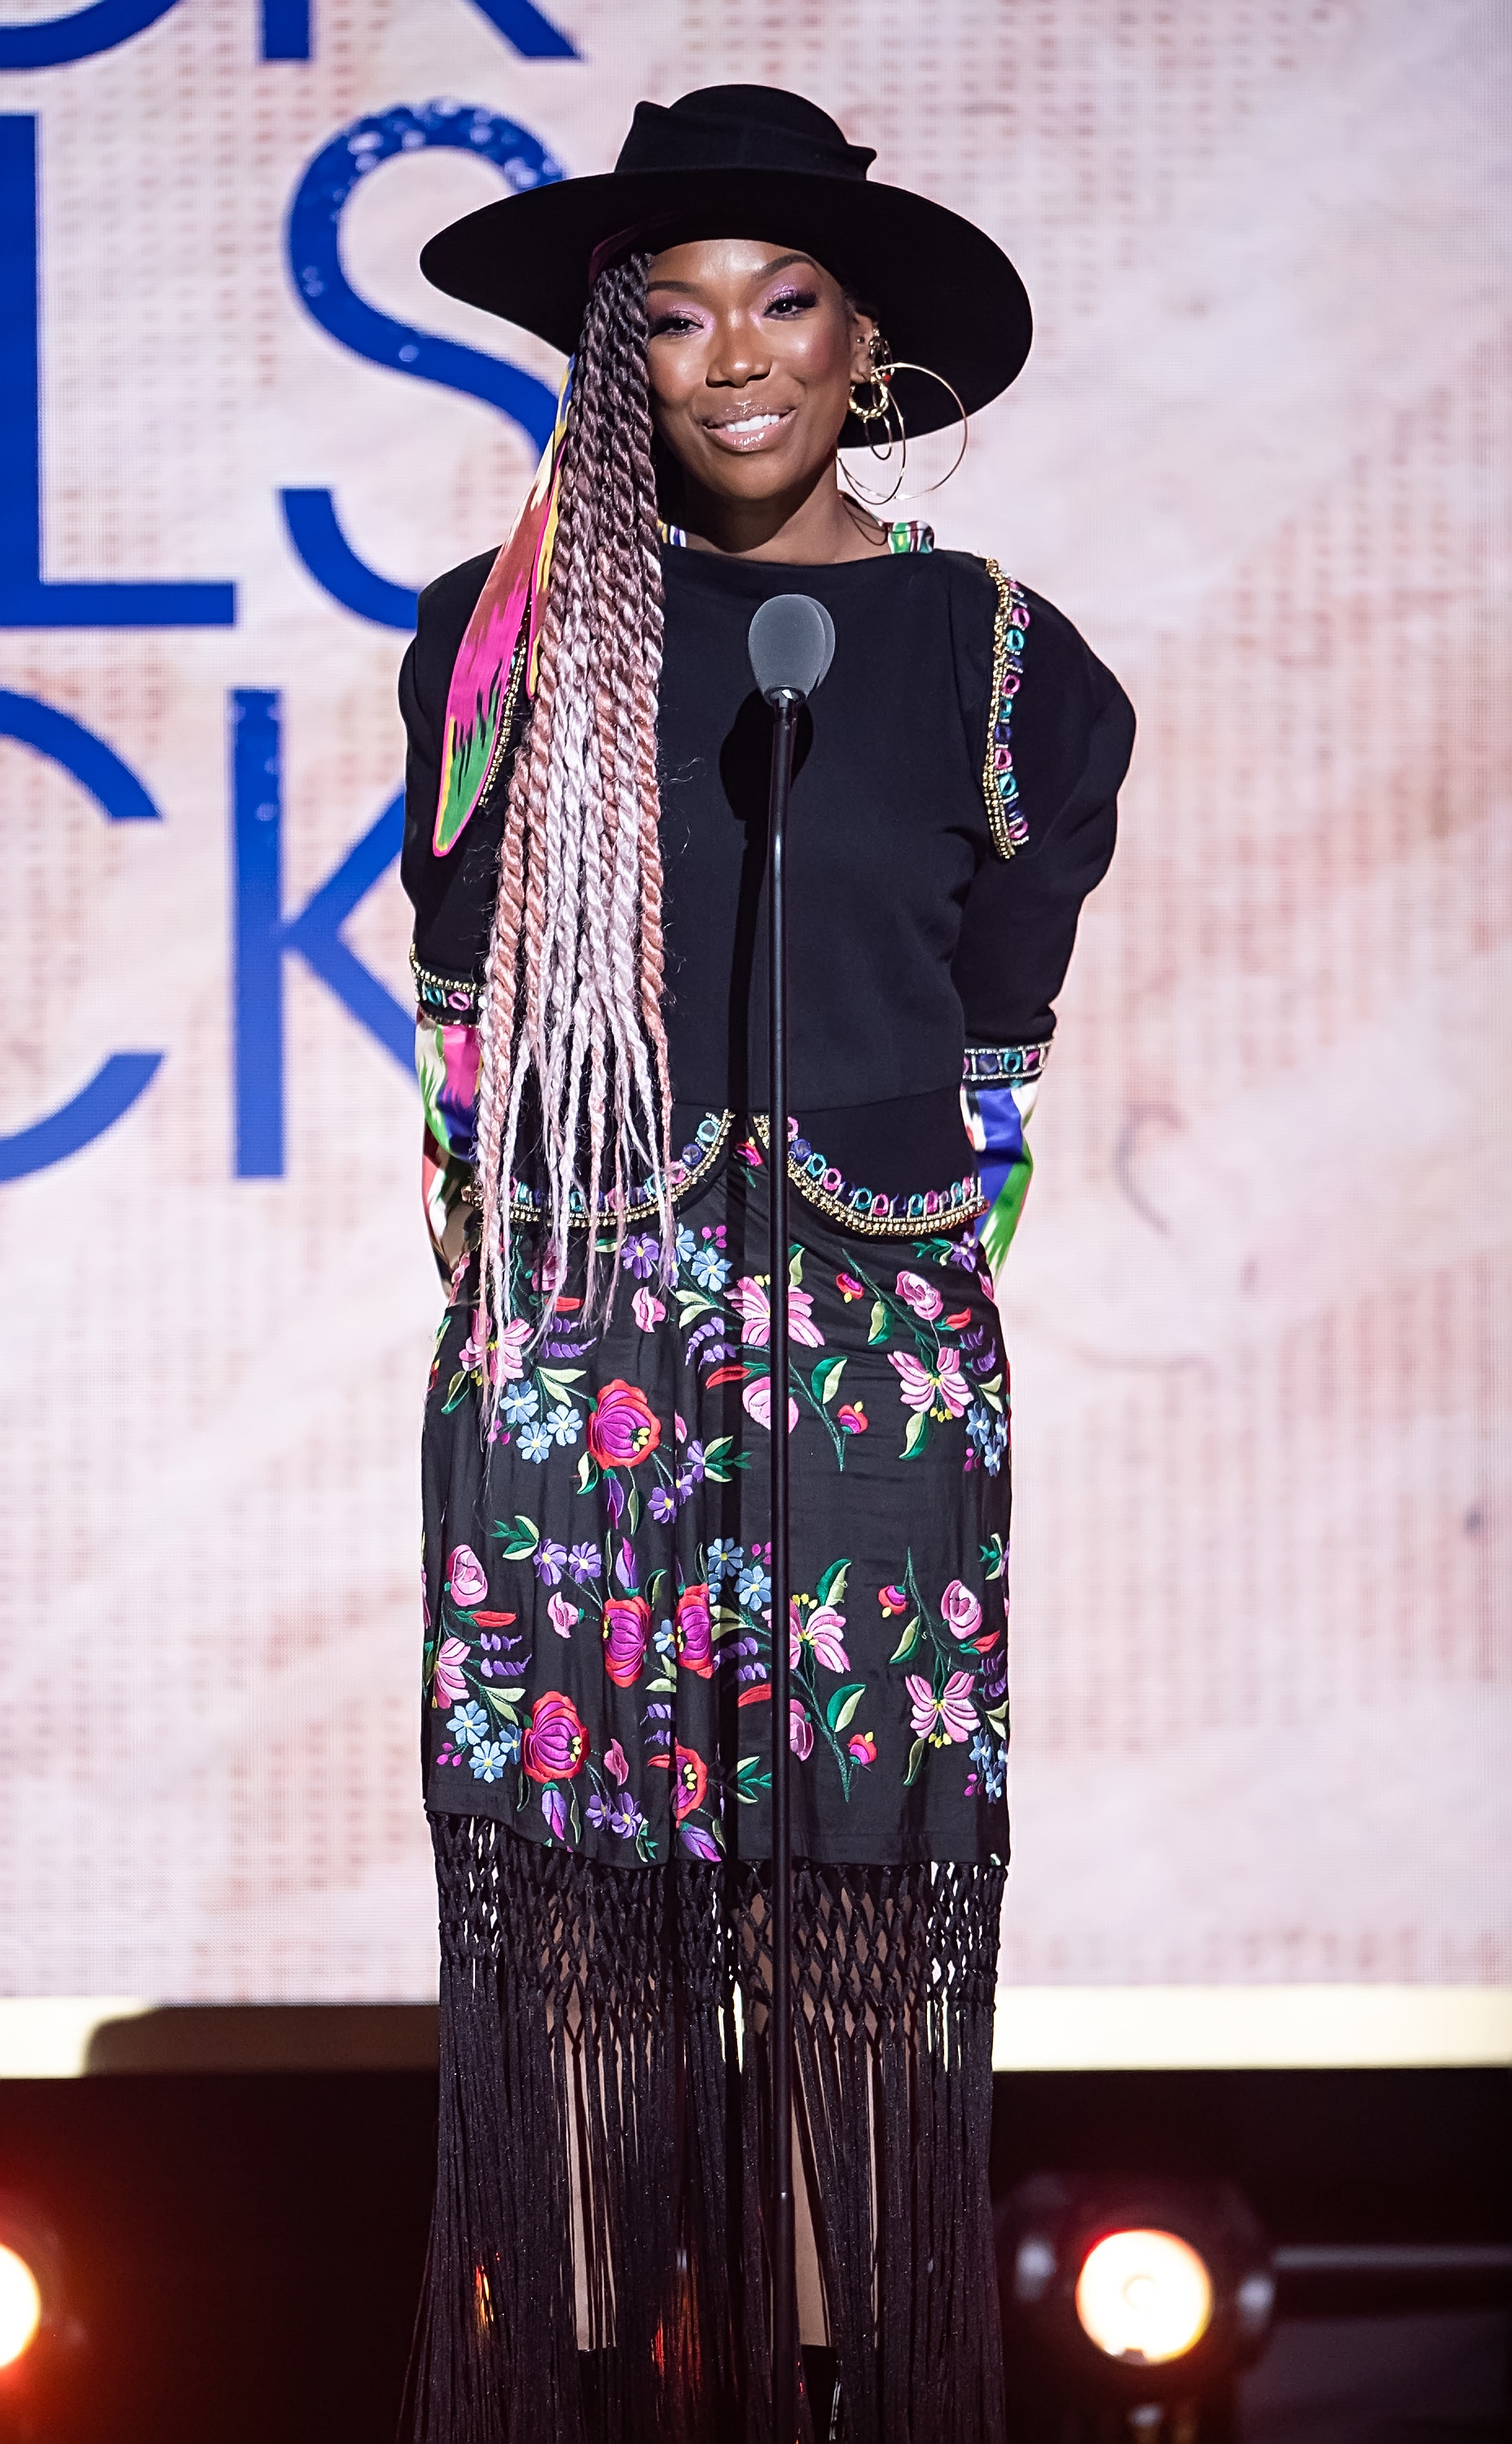 Brandy wearing a floral print skirt, long-sleeved top, and wide-brimmed hat as she speaks onstage